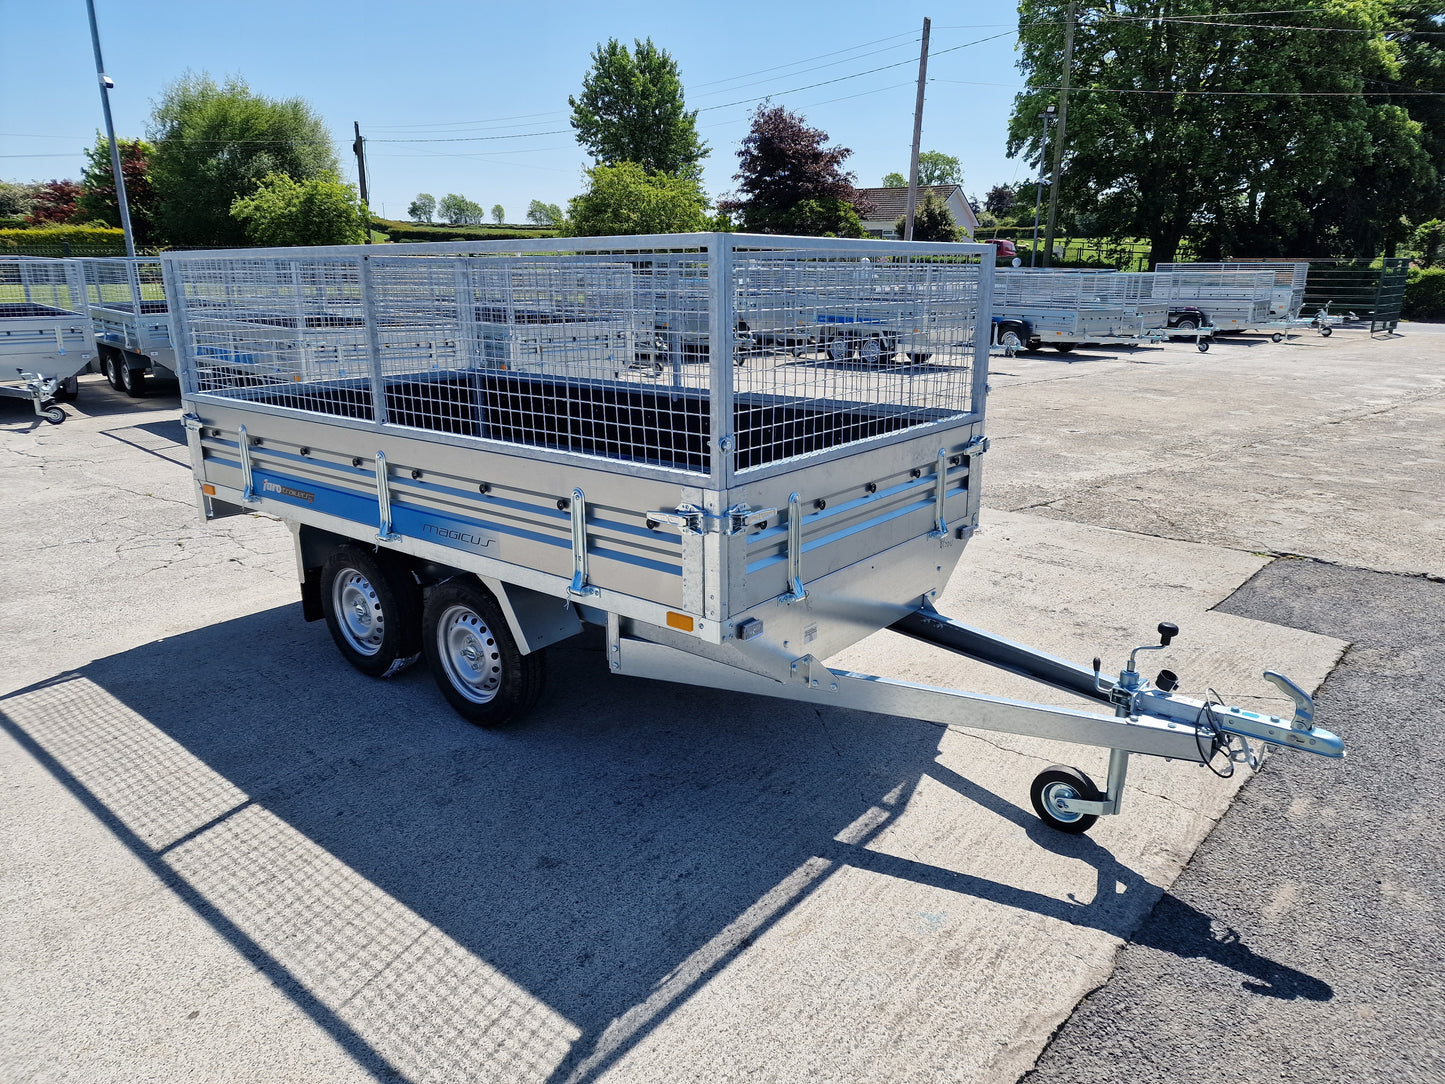 9 x 5 Twin Axle Dropside Trailer with Mesh